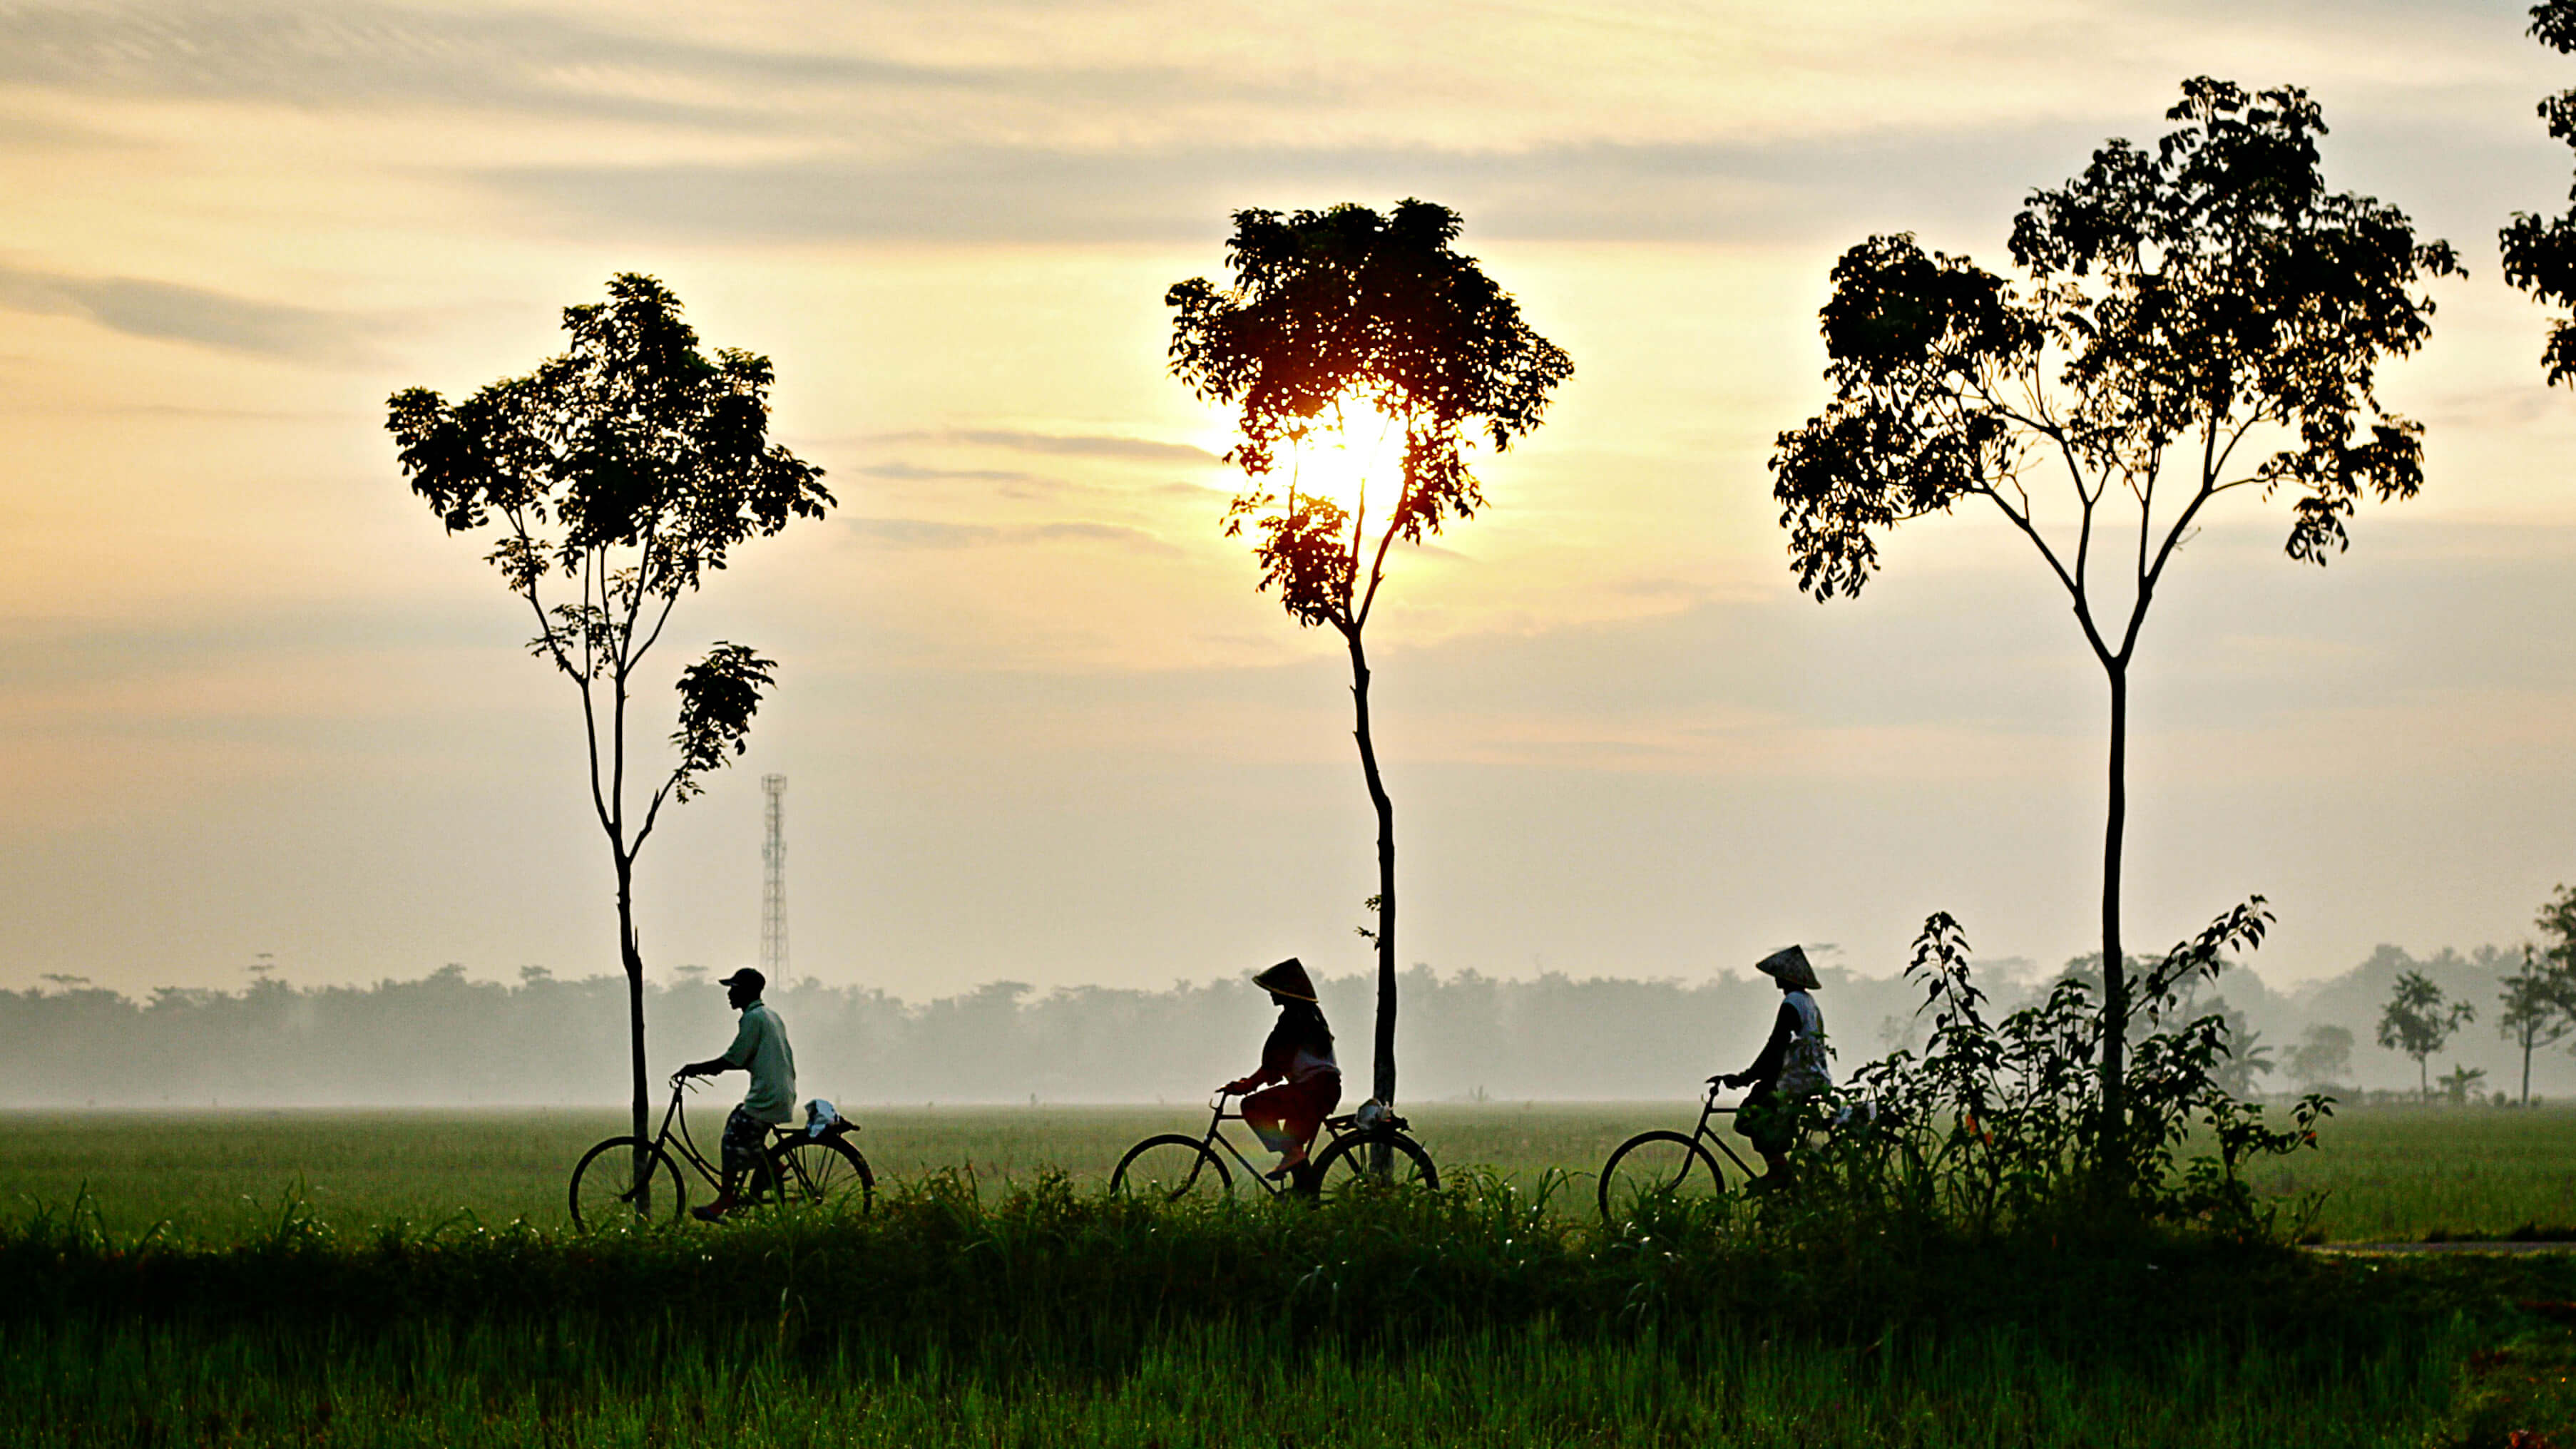 3 people on bikes cycling across the landscape in Vietnam 3 trees the middle one covers the sun